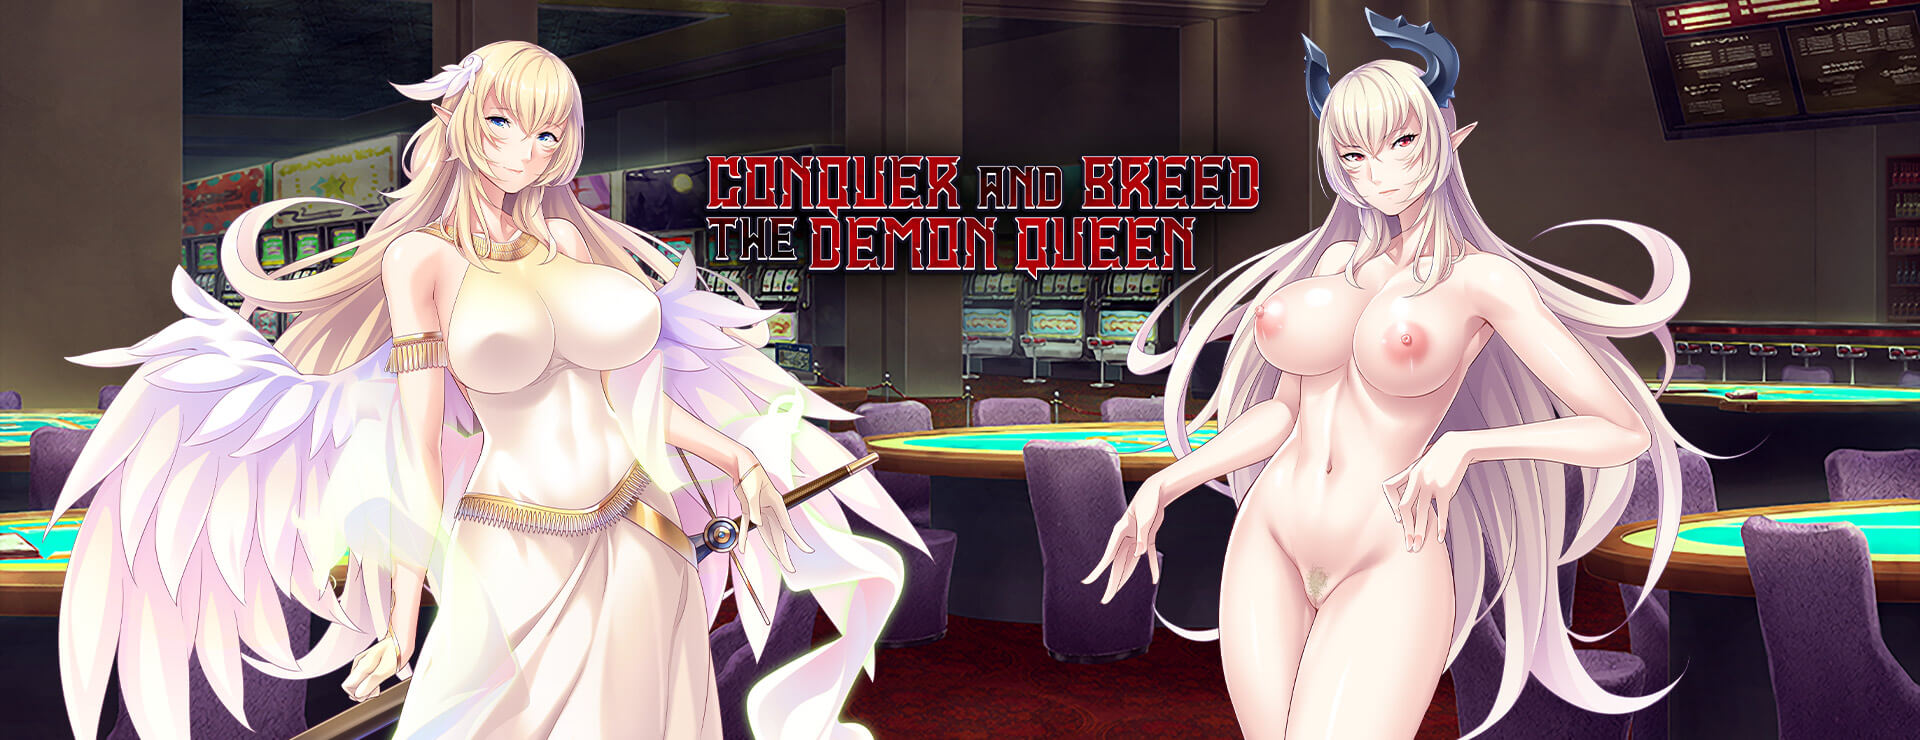 Conquer and Breed the Demon Queen - Visual Novel Game